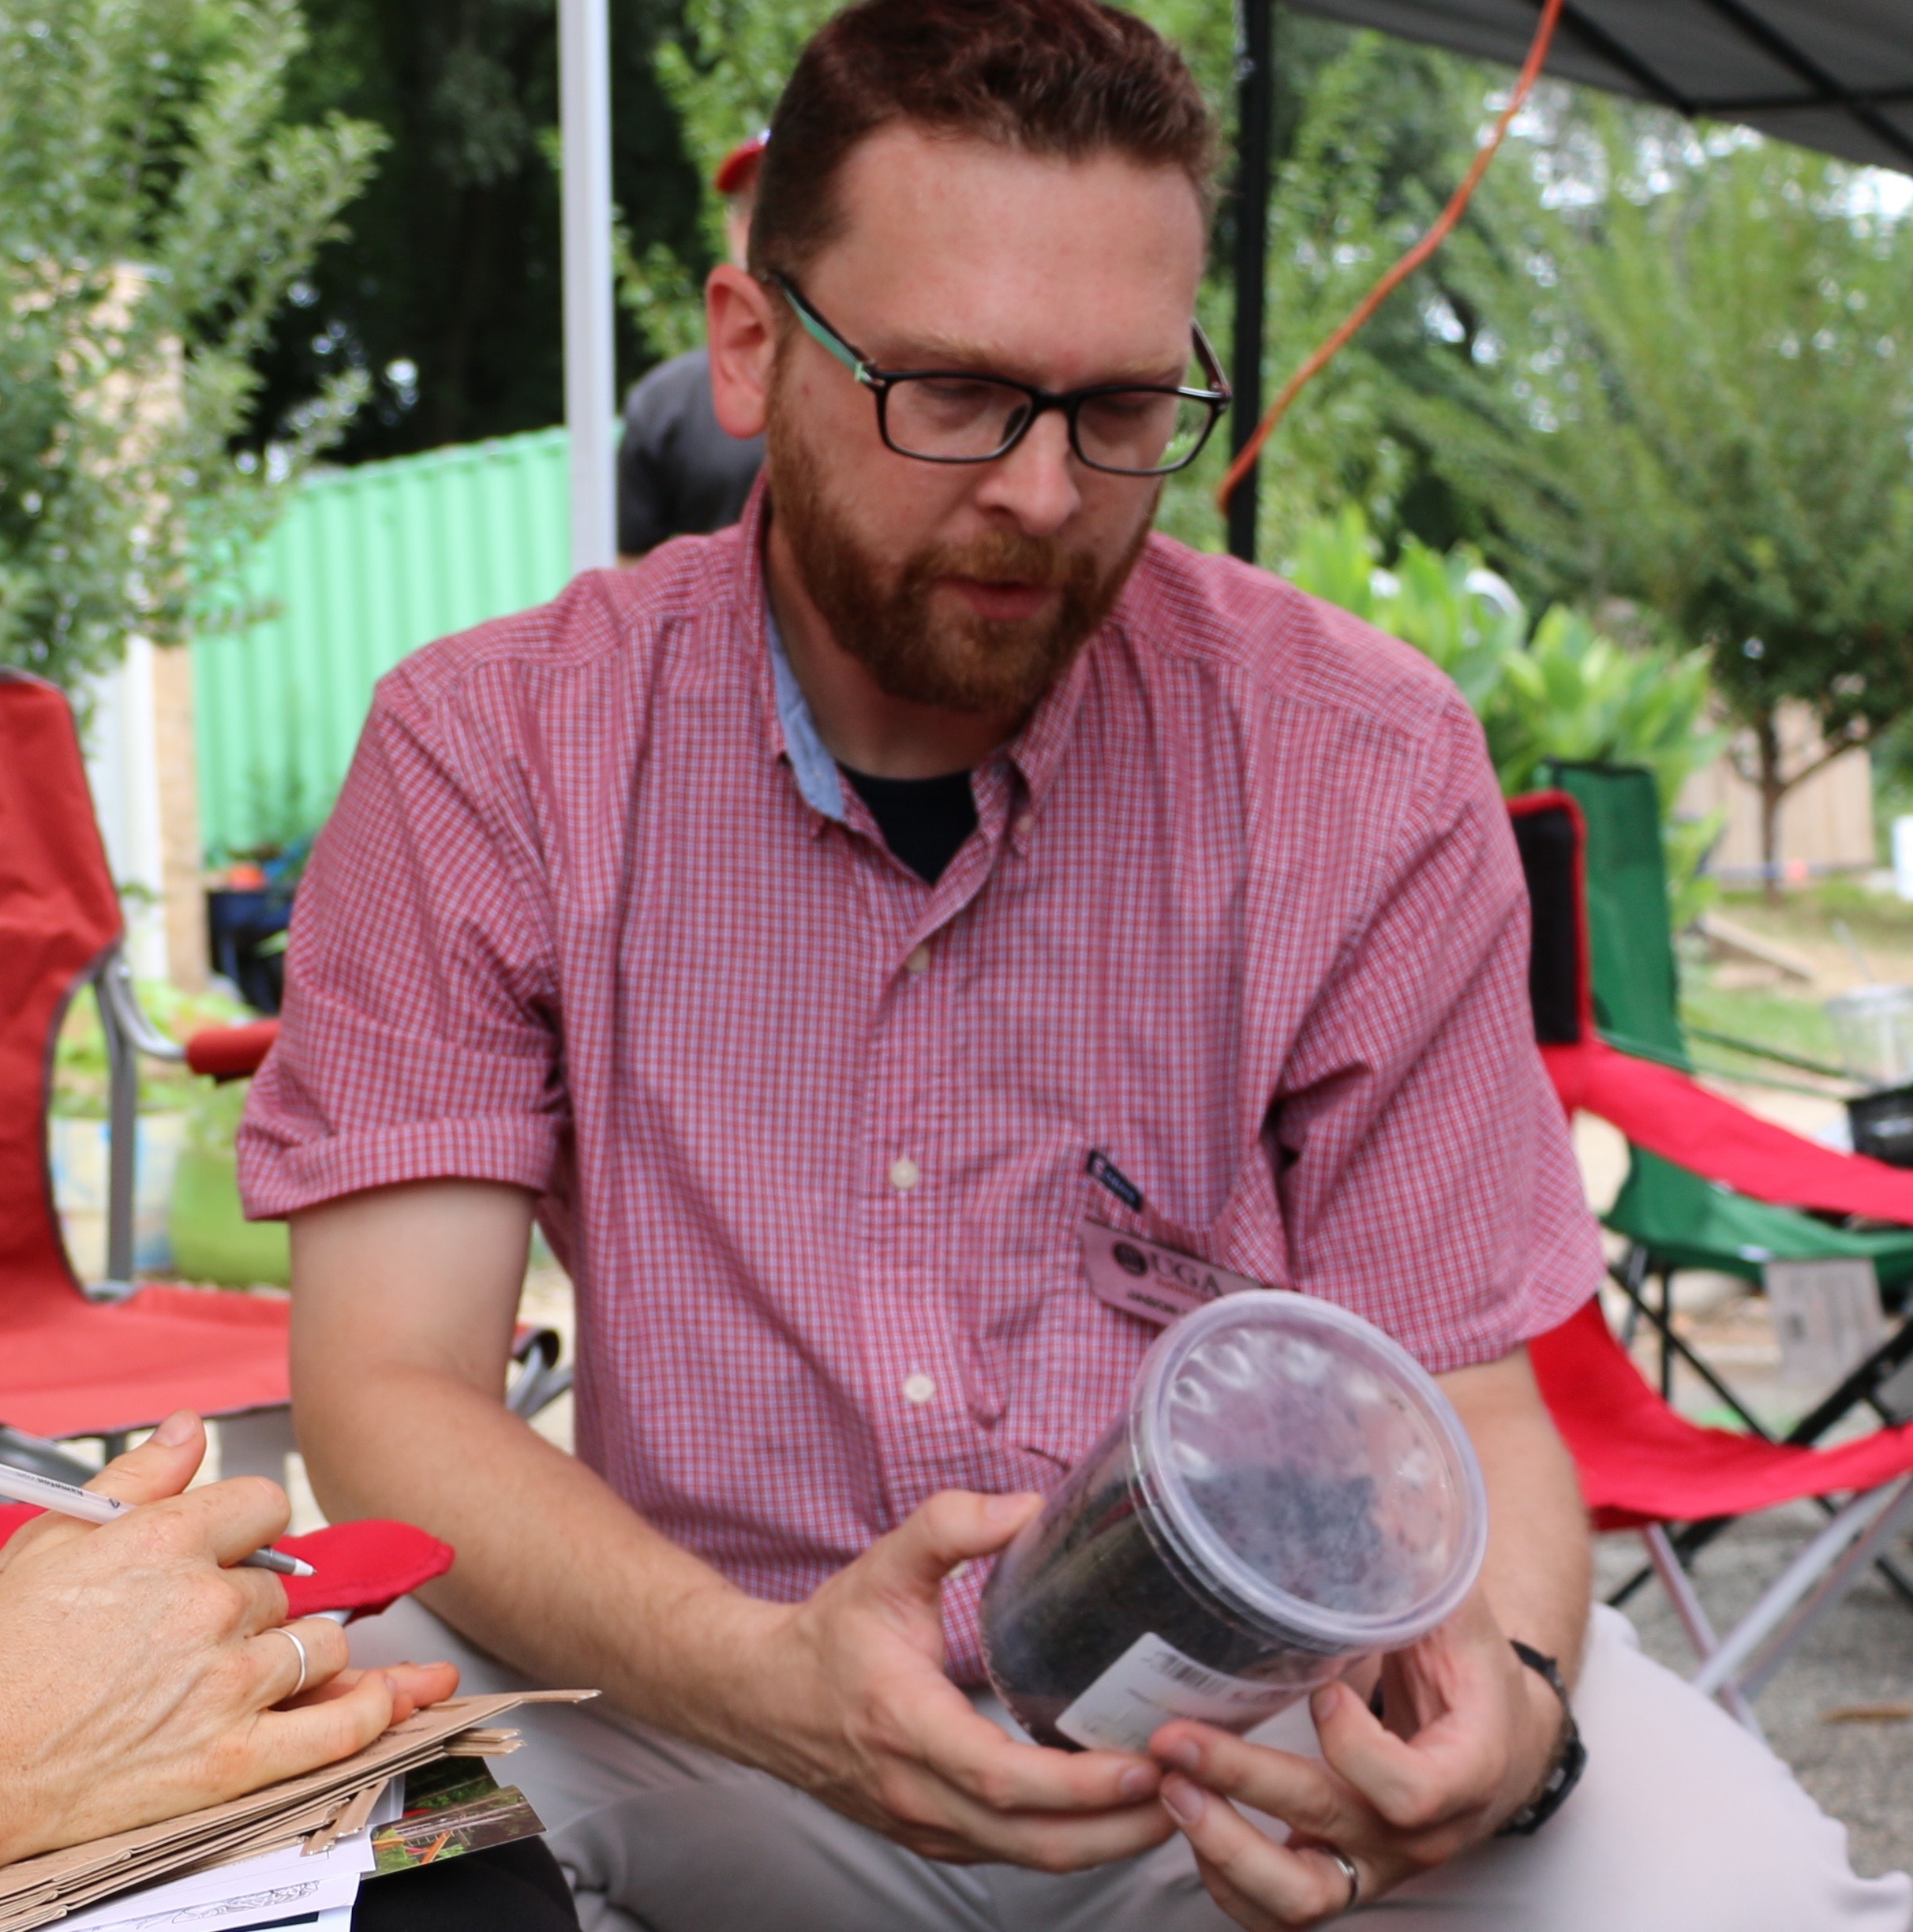 Representatives of UGA's Soil, Plant and Water Analysis Laboratory will be on hand to answer gardeners' soil questions in downtown Atlanta on Aug. 27 at Love Local: A Soil Festival to Grow Healthier Communities.